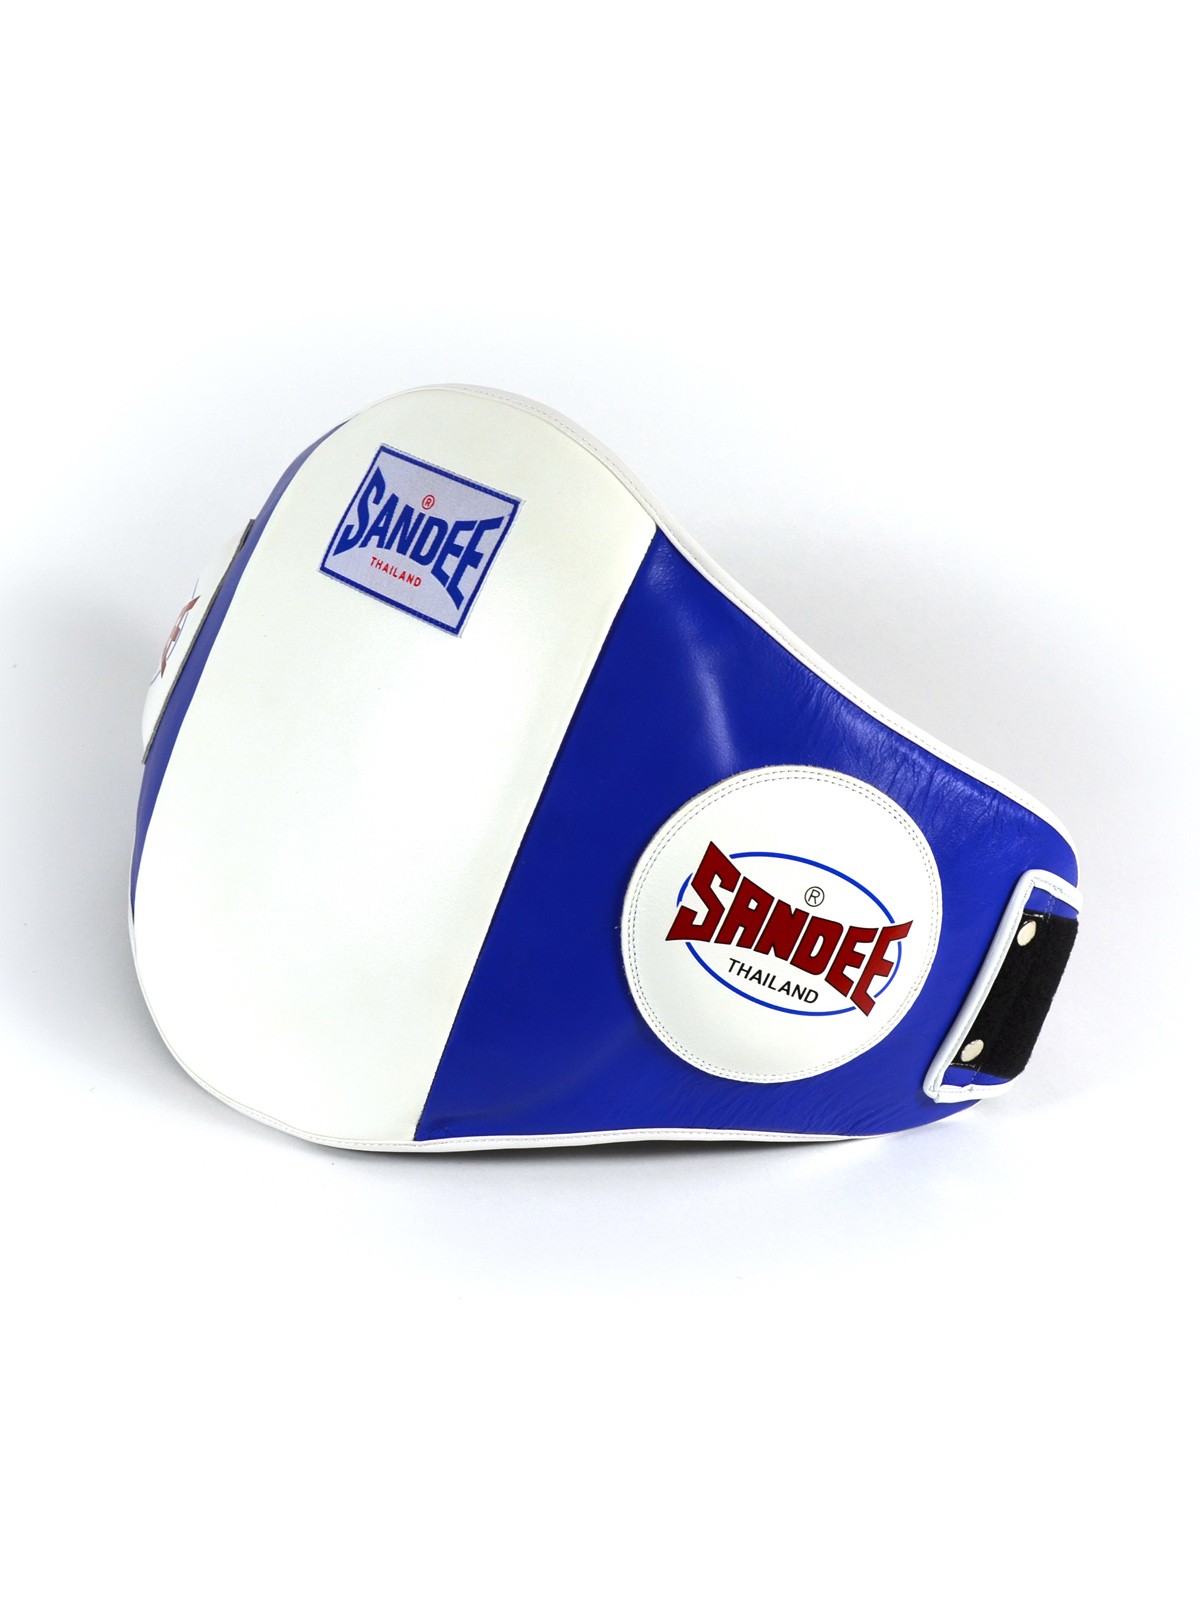 Sandee Muay Thai Boxing Belly Pad Blue & White Leather Training 